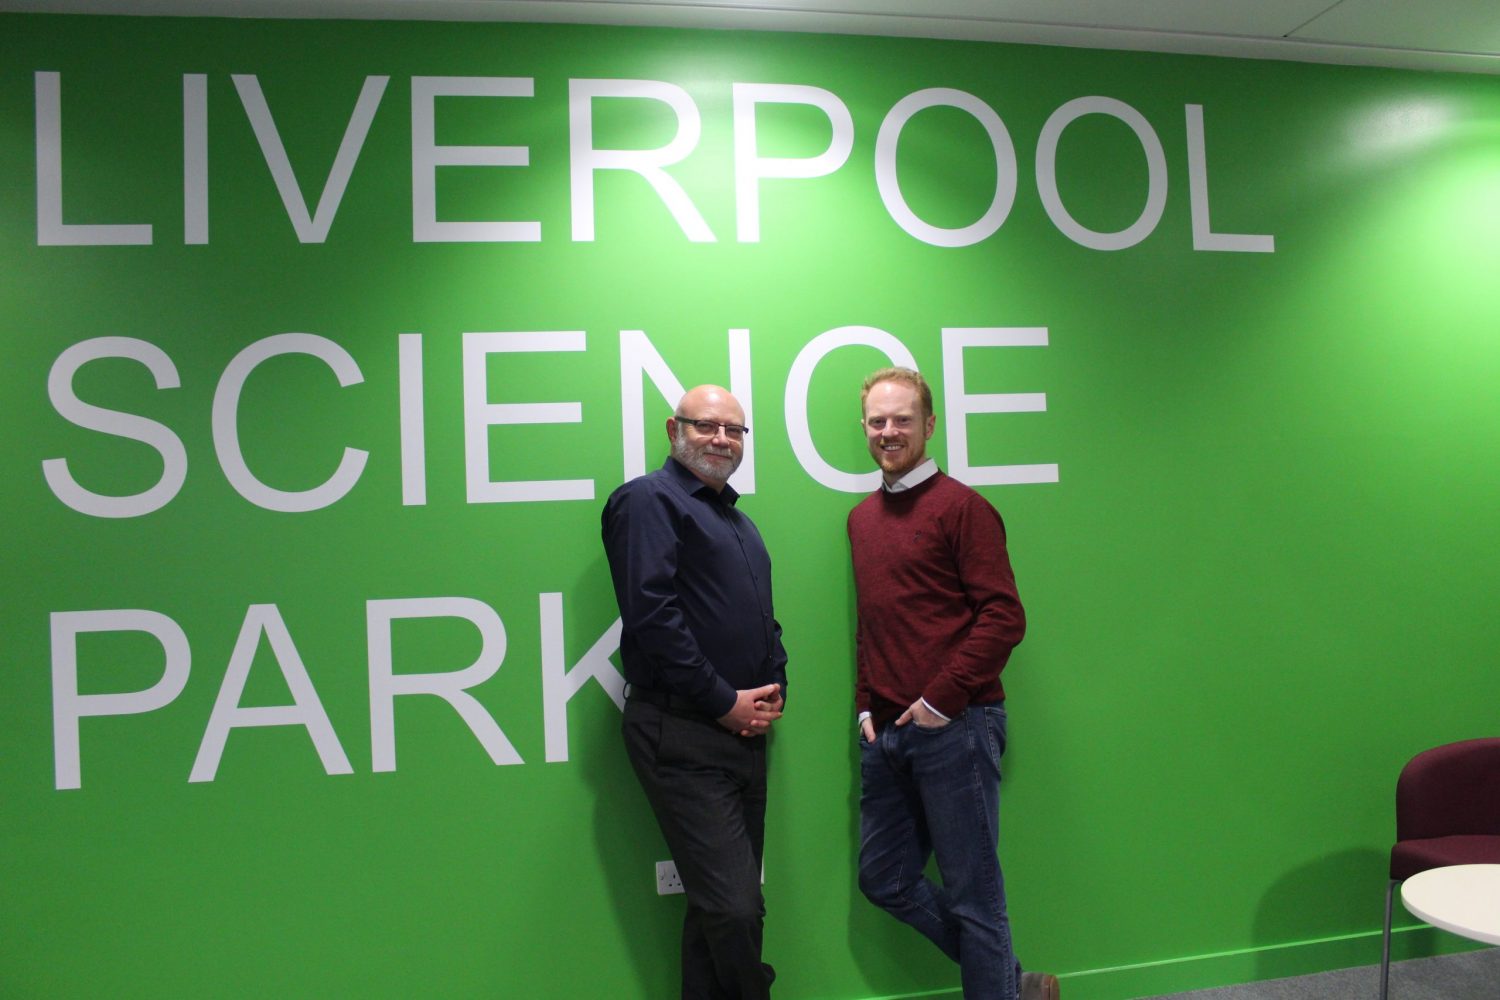 Two men standing in front of a green wall with white writing stating Liverpool Science Park. Man to the left has glasses andis wearing a dark blue suit and man to the right is wearing a maroon jumper and blue trousers.